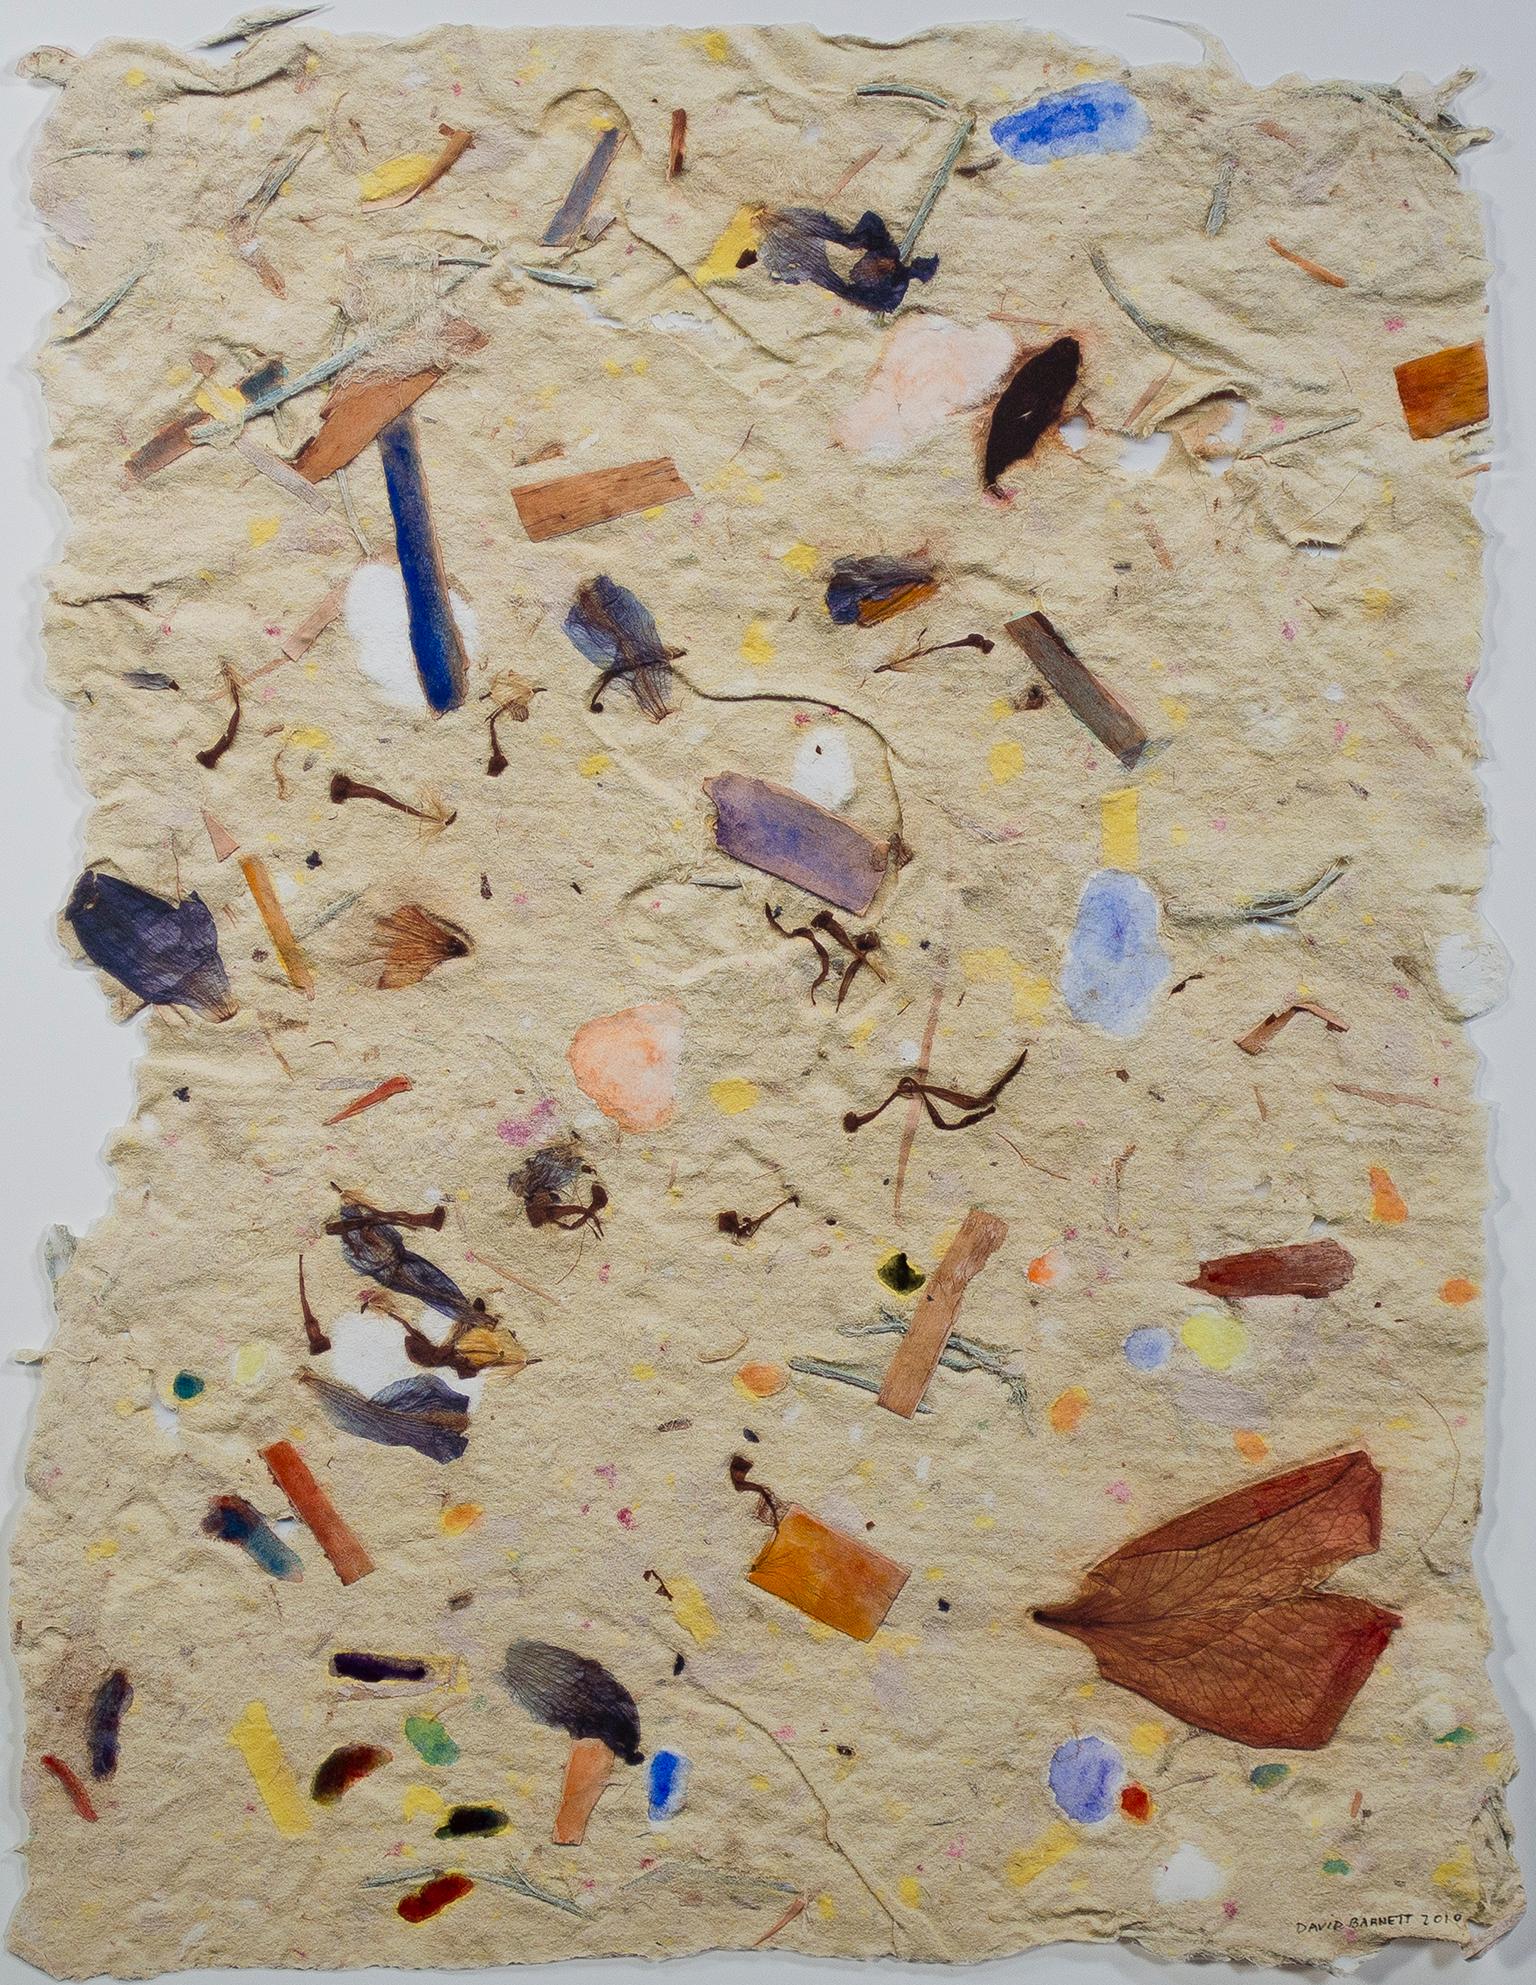 "Garden Celebration I" is an original mixed media piece by David Barnett, including watercolor on paper that was hand-made by the artist. The artist has embedded various objects into the paper, including leaves and flower petals and colored strips